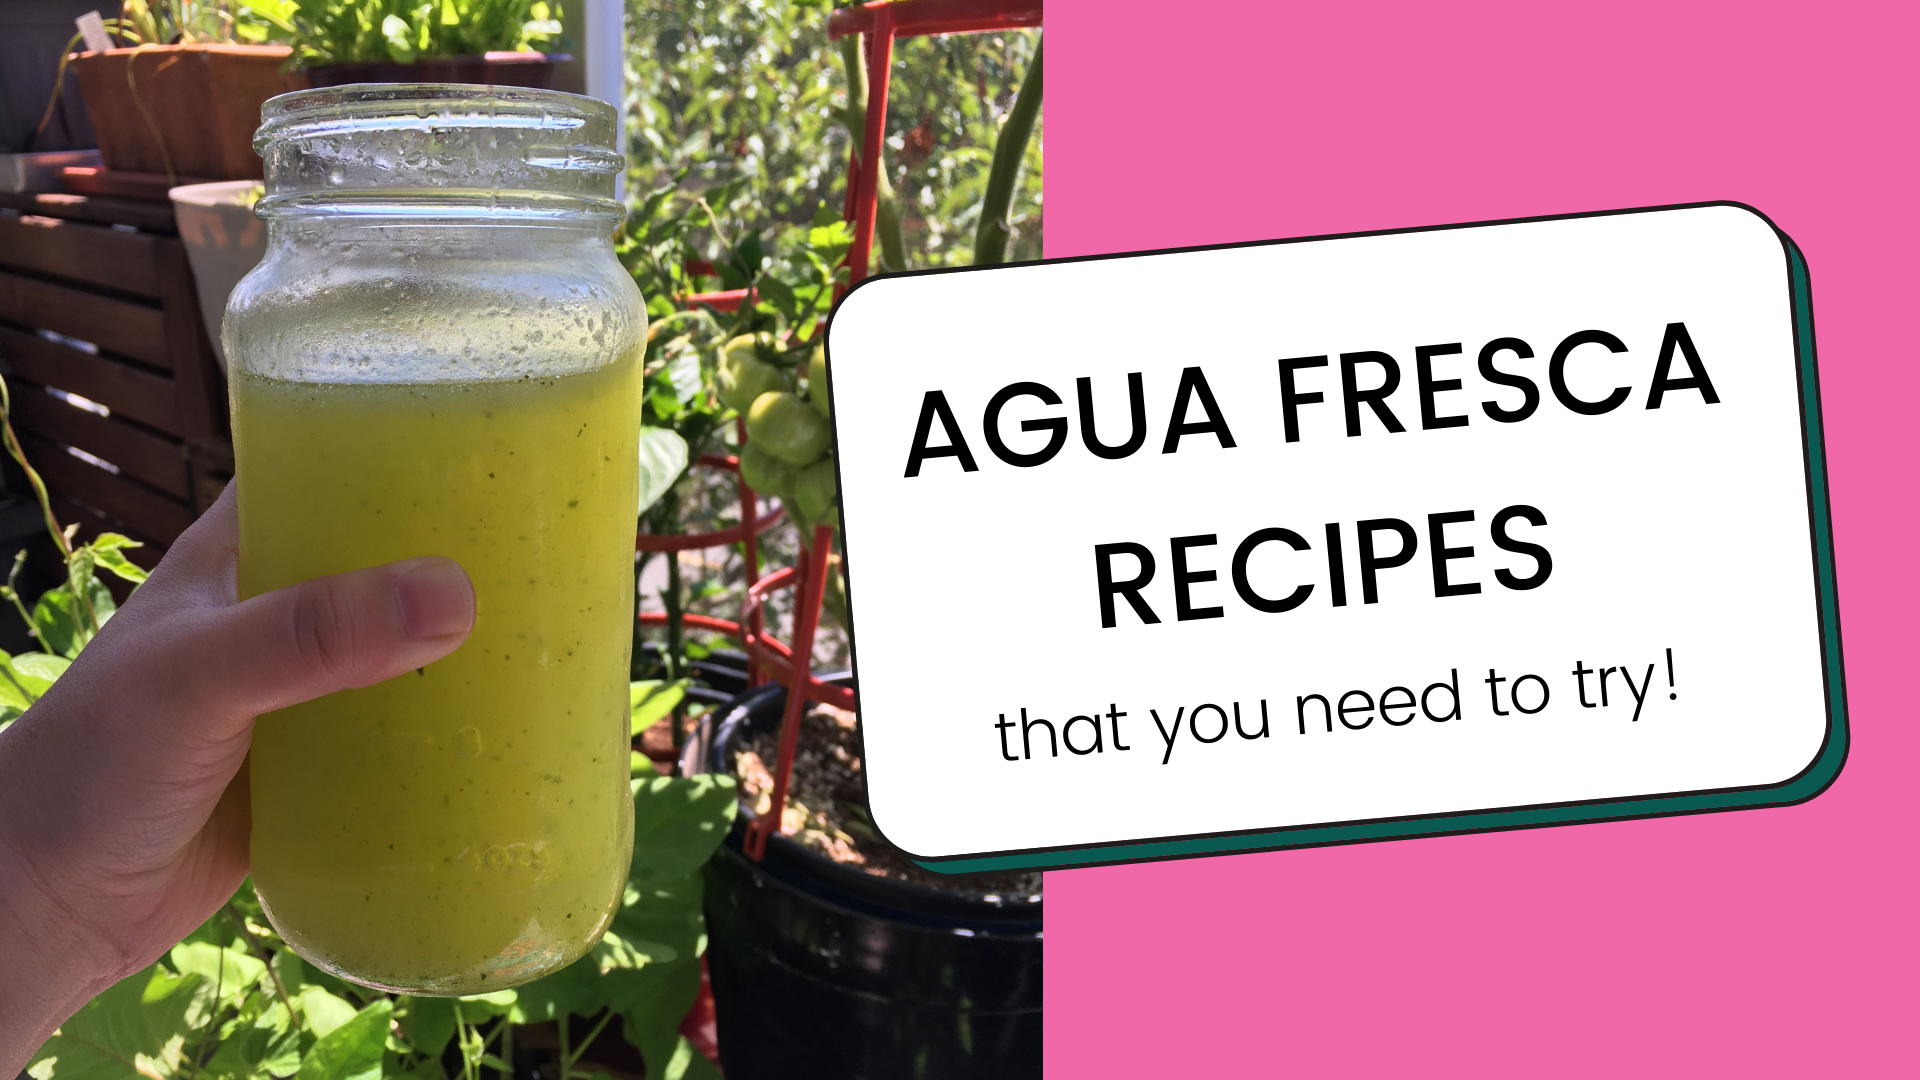 Agua Fresca Recipes to Keep You Cool This Summer